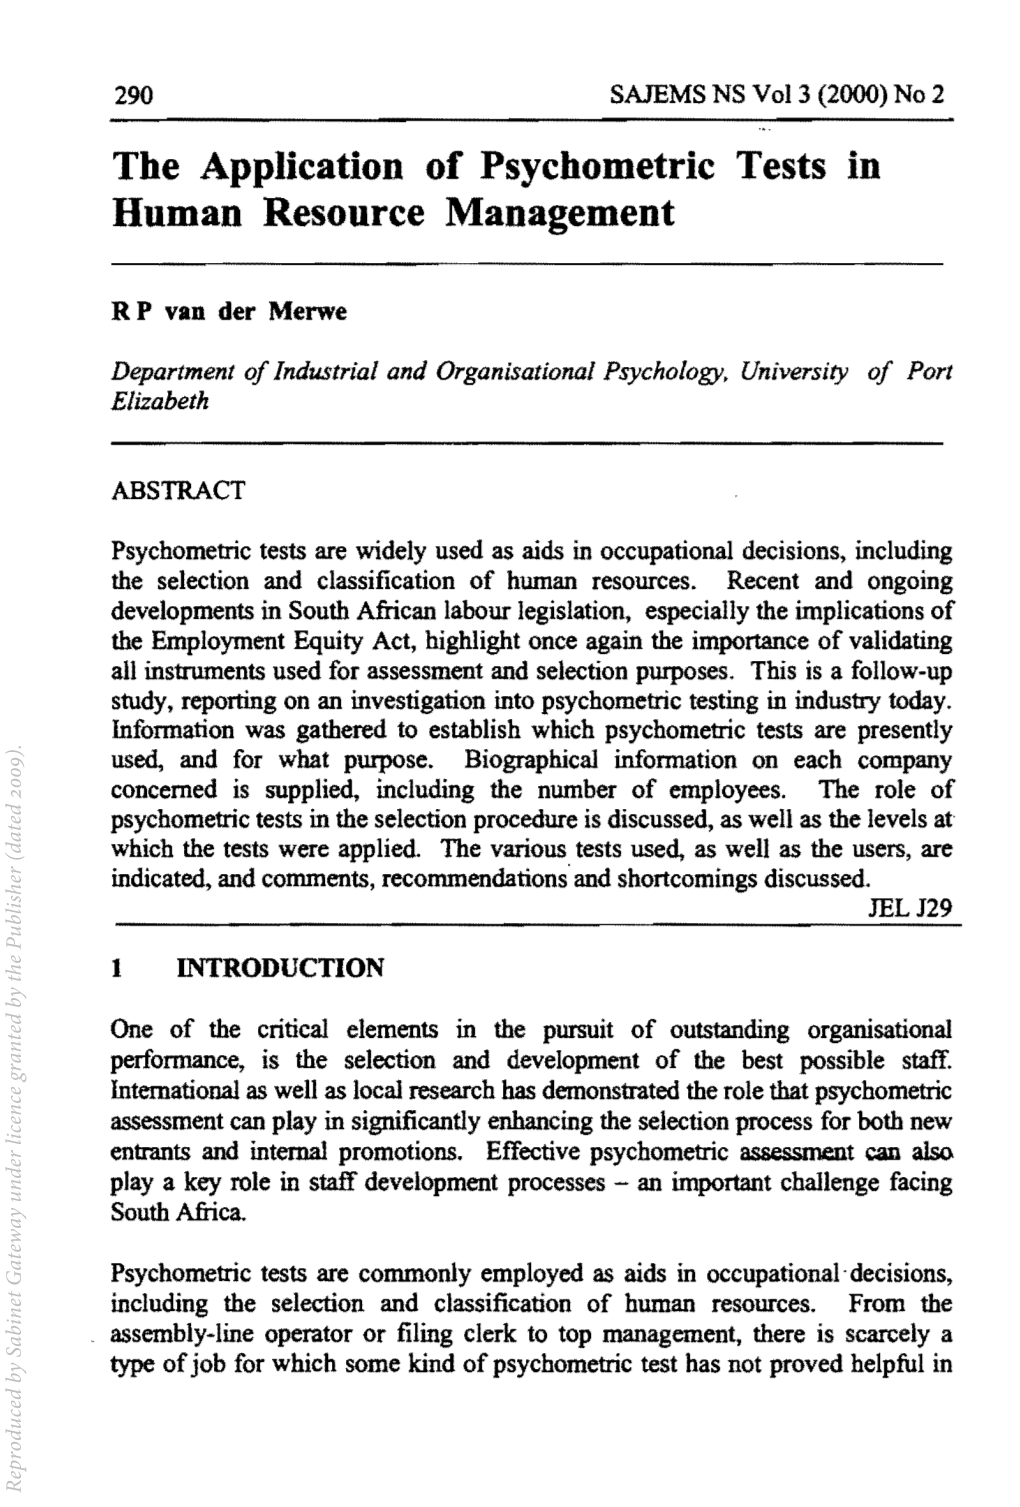 The Application of Psychometric Tests in Human Resource Management